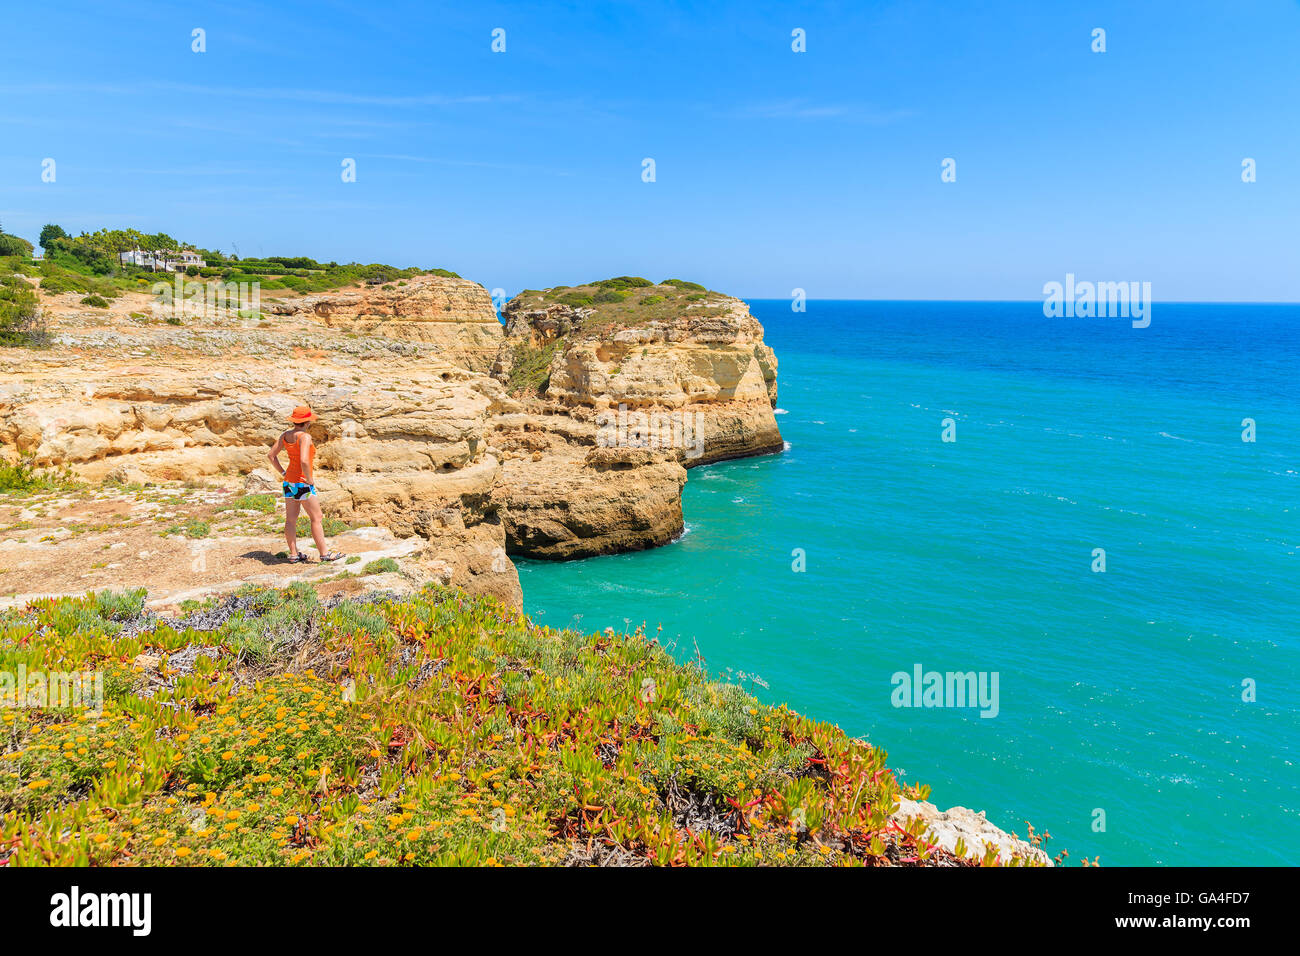 Young woman tourist standing on cliff and looking at beautiful beach near Carvoeiro town, Algarve region, Portugal Stock Photo